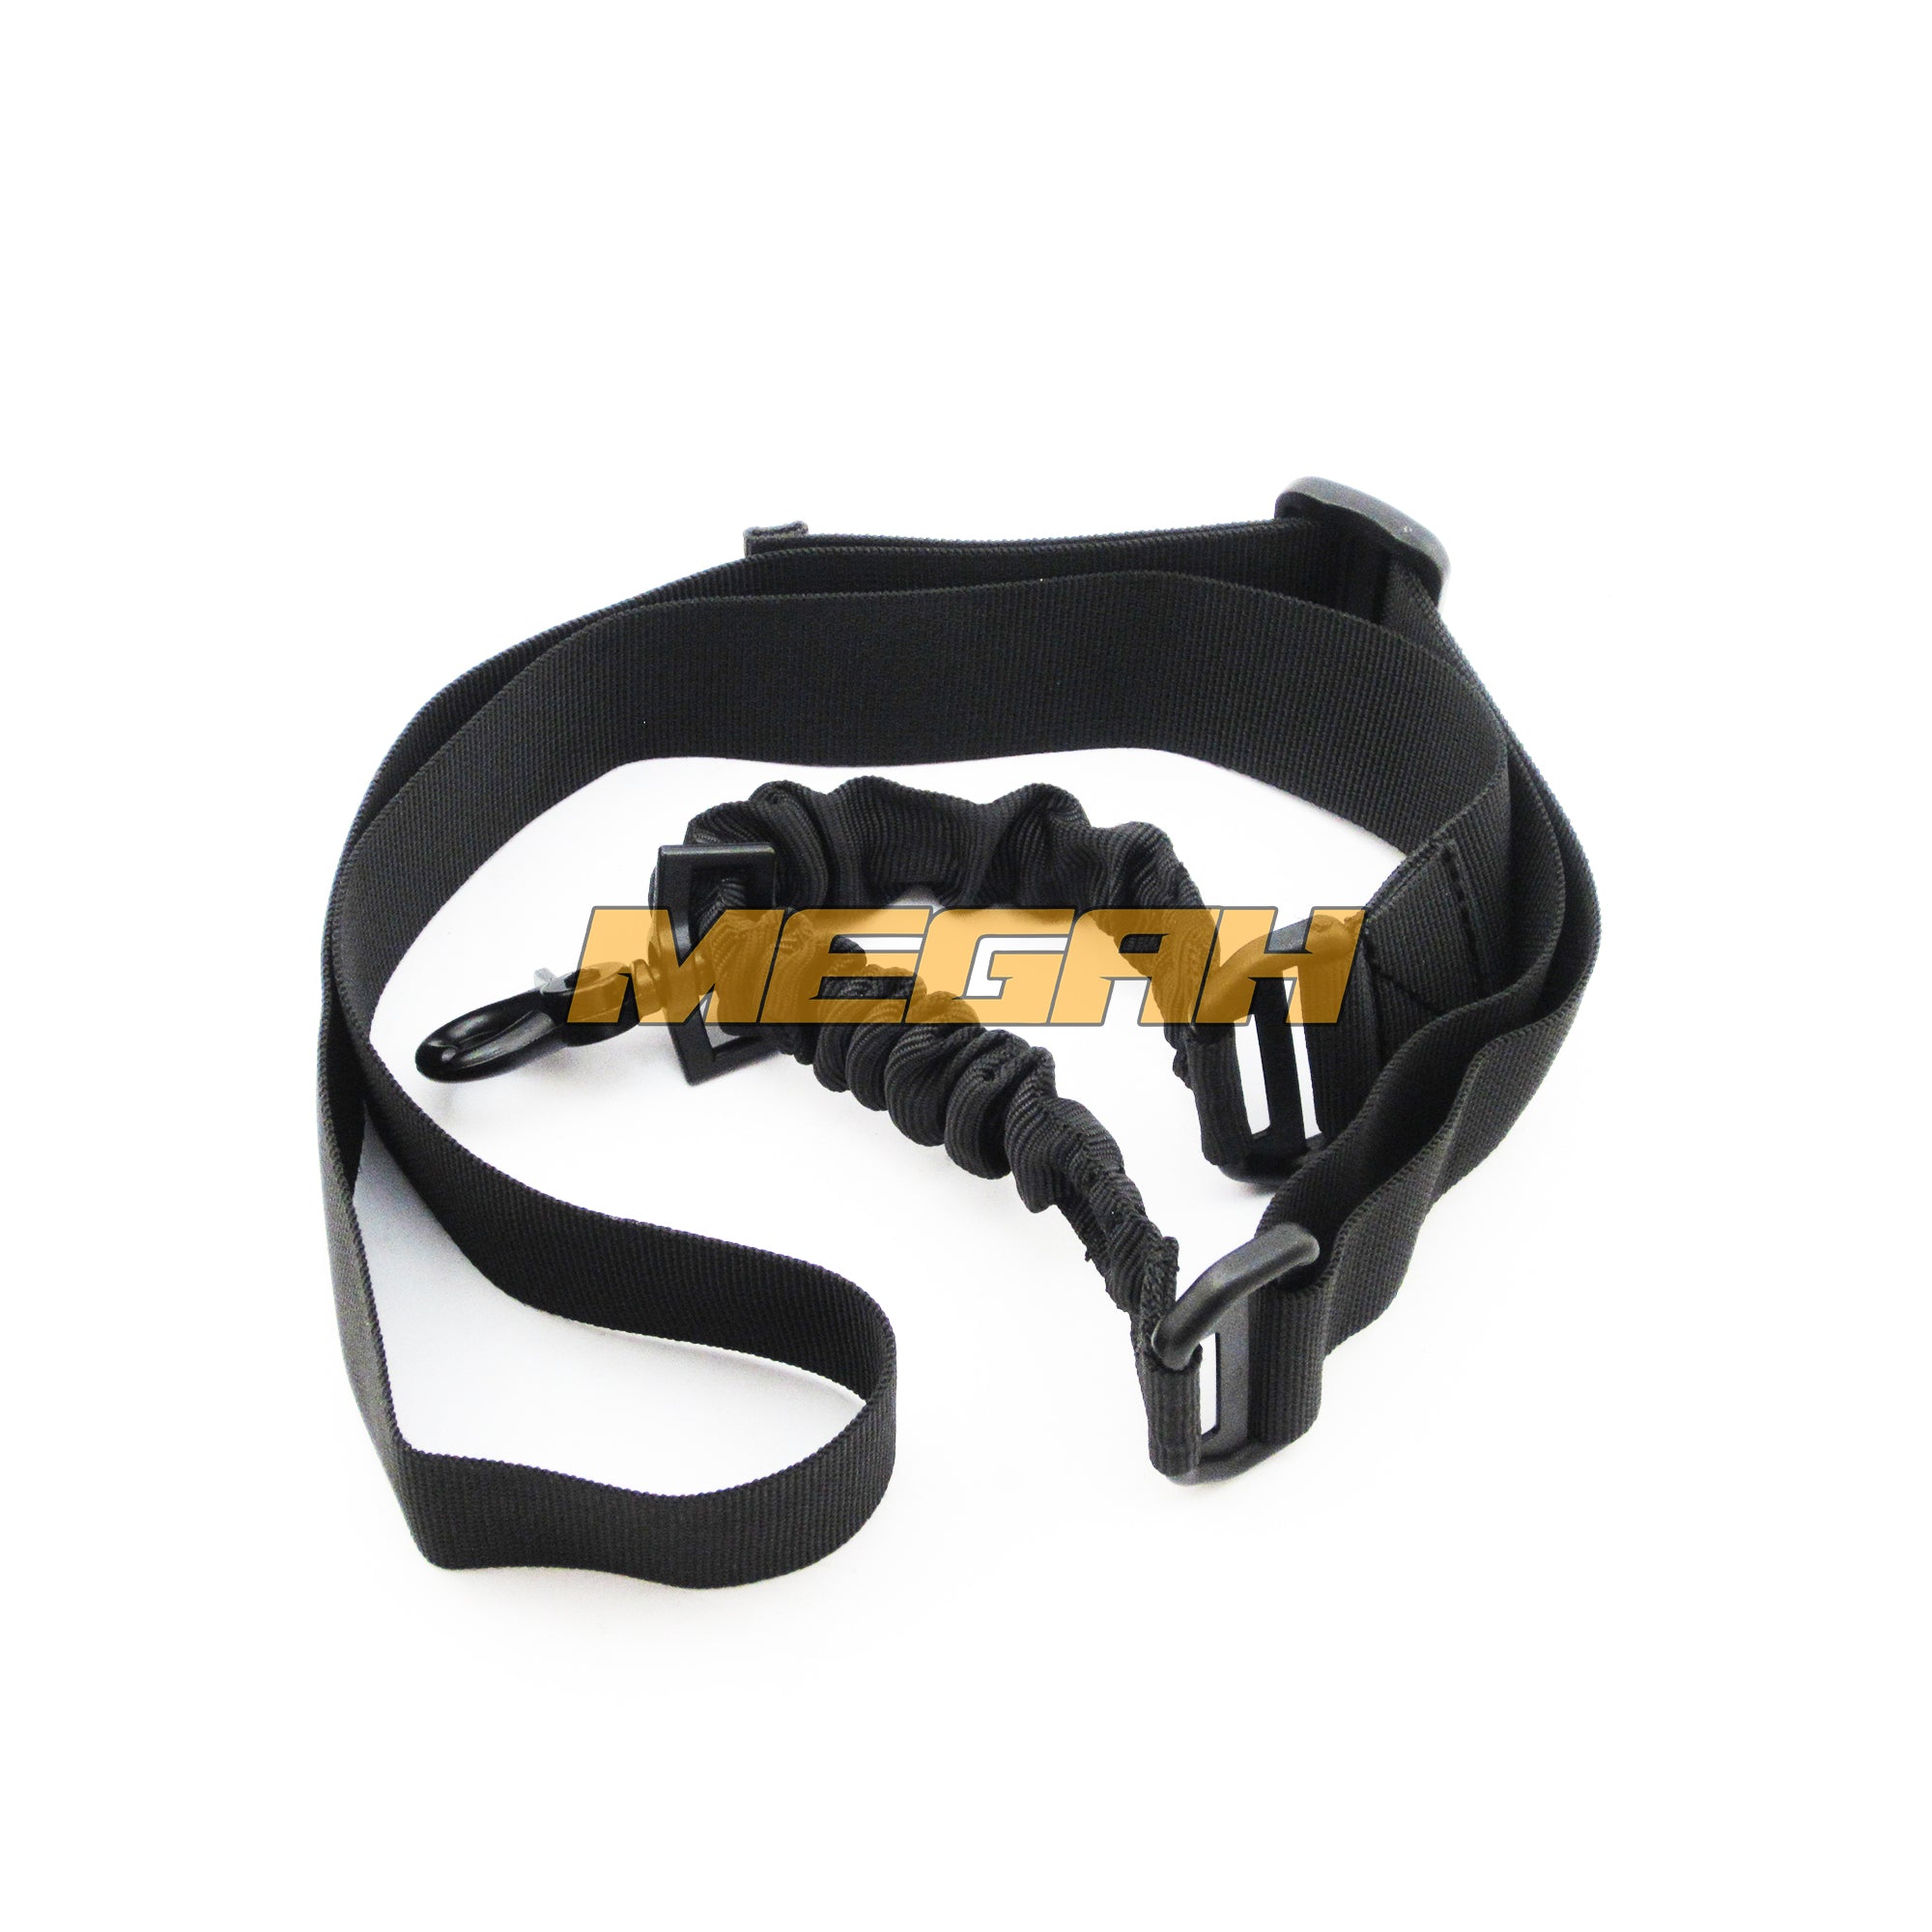 SLING AIRSOFT IMPORT 2 POINT (AS432) - Megah Sport